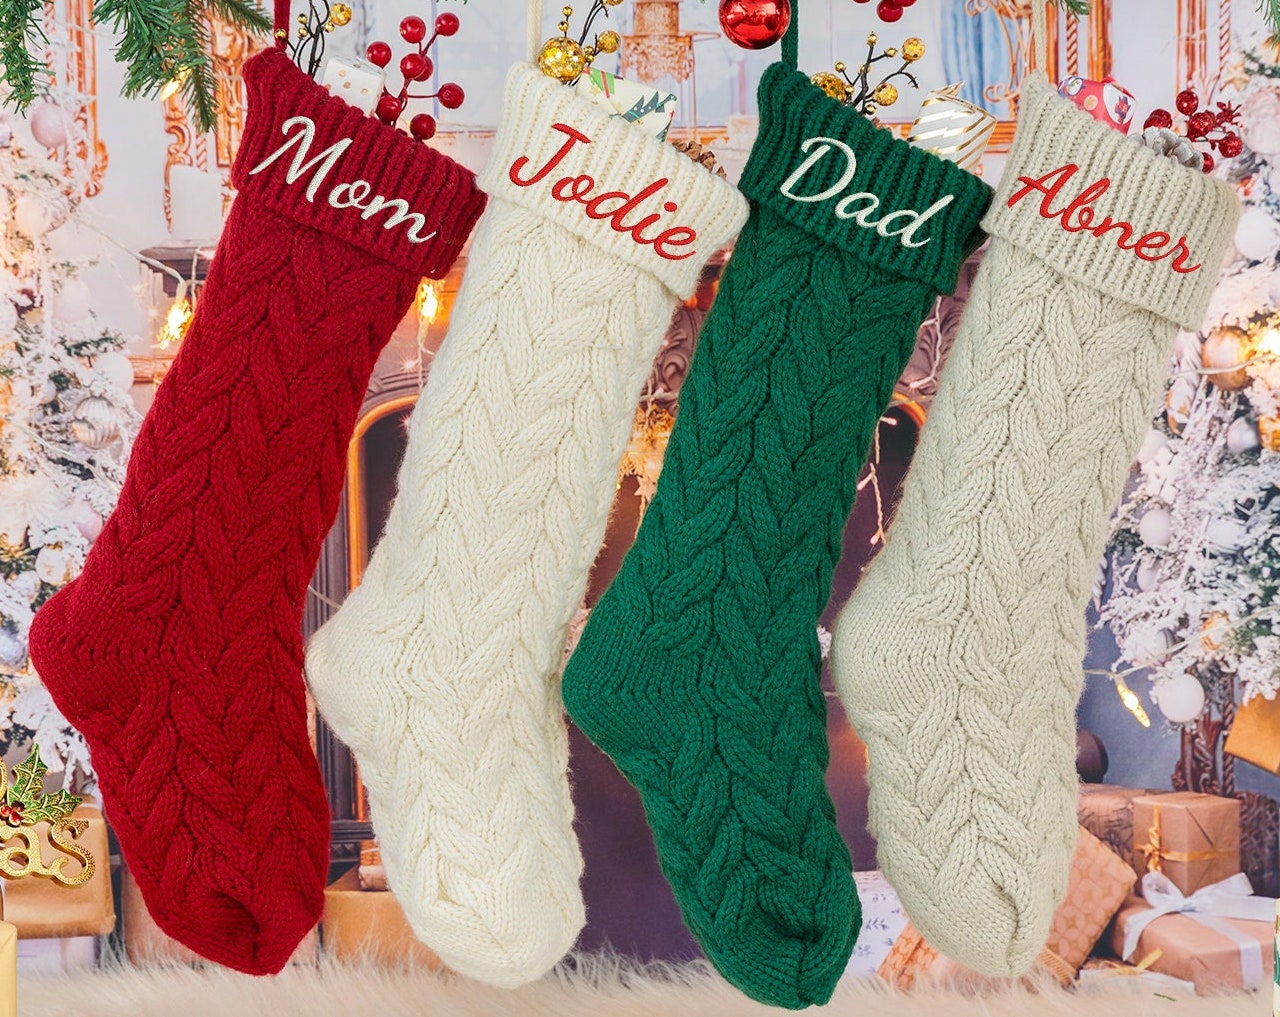 Personalized Christmas Embroidered Stocking